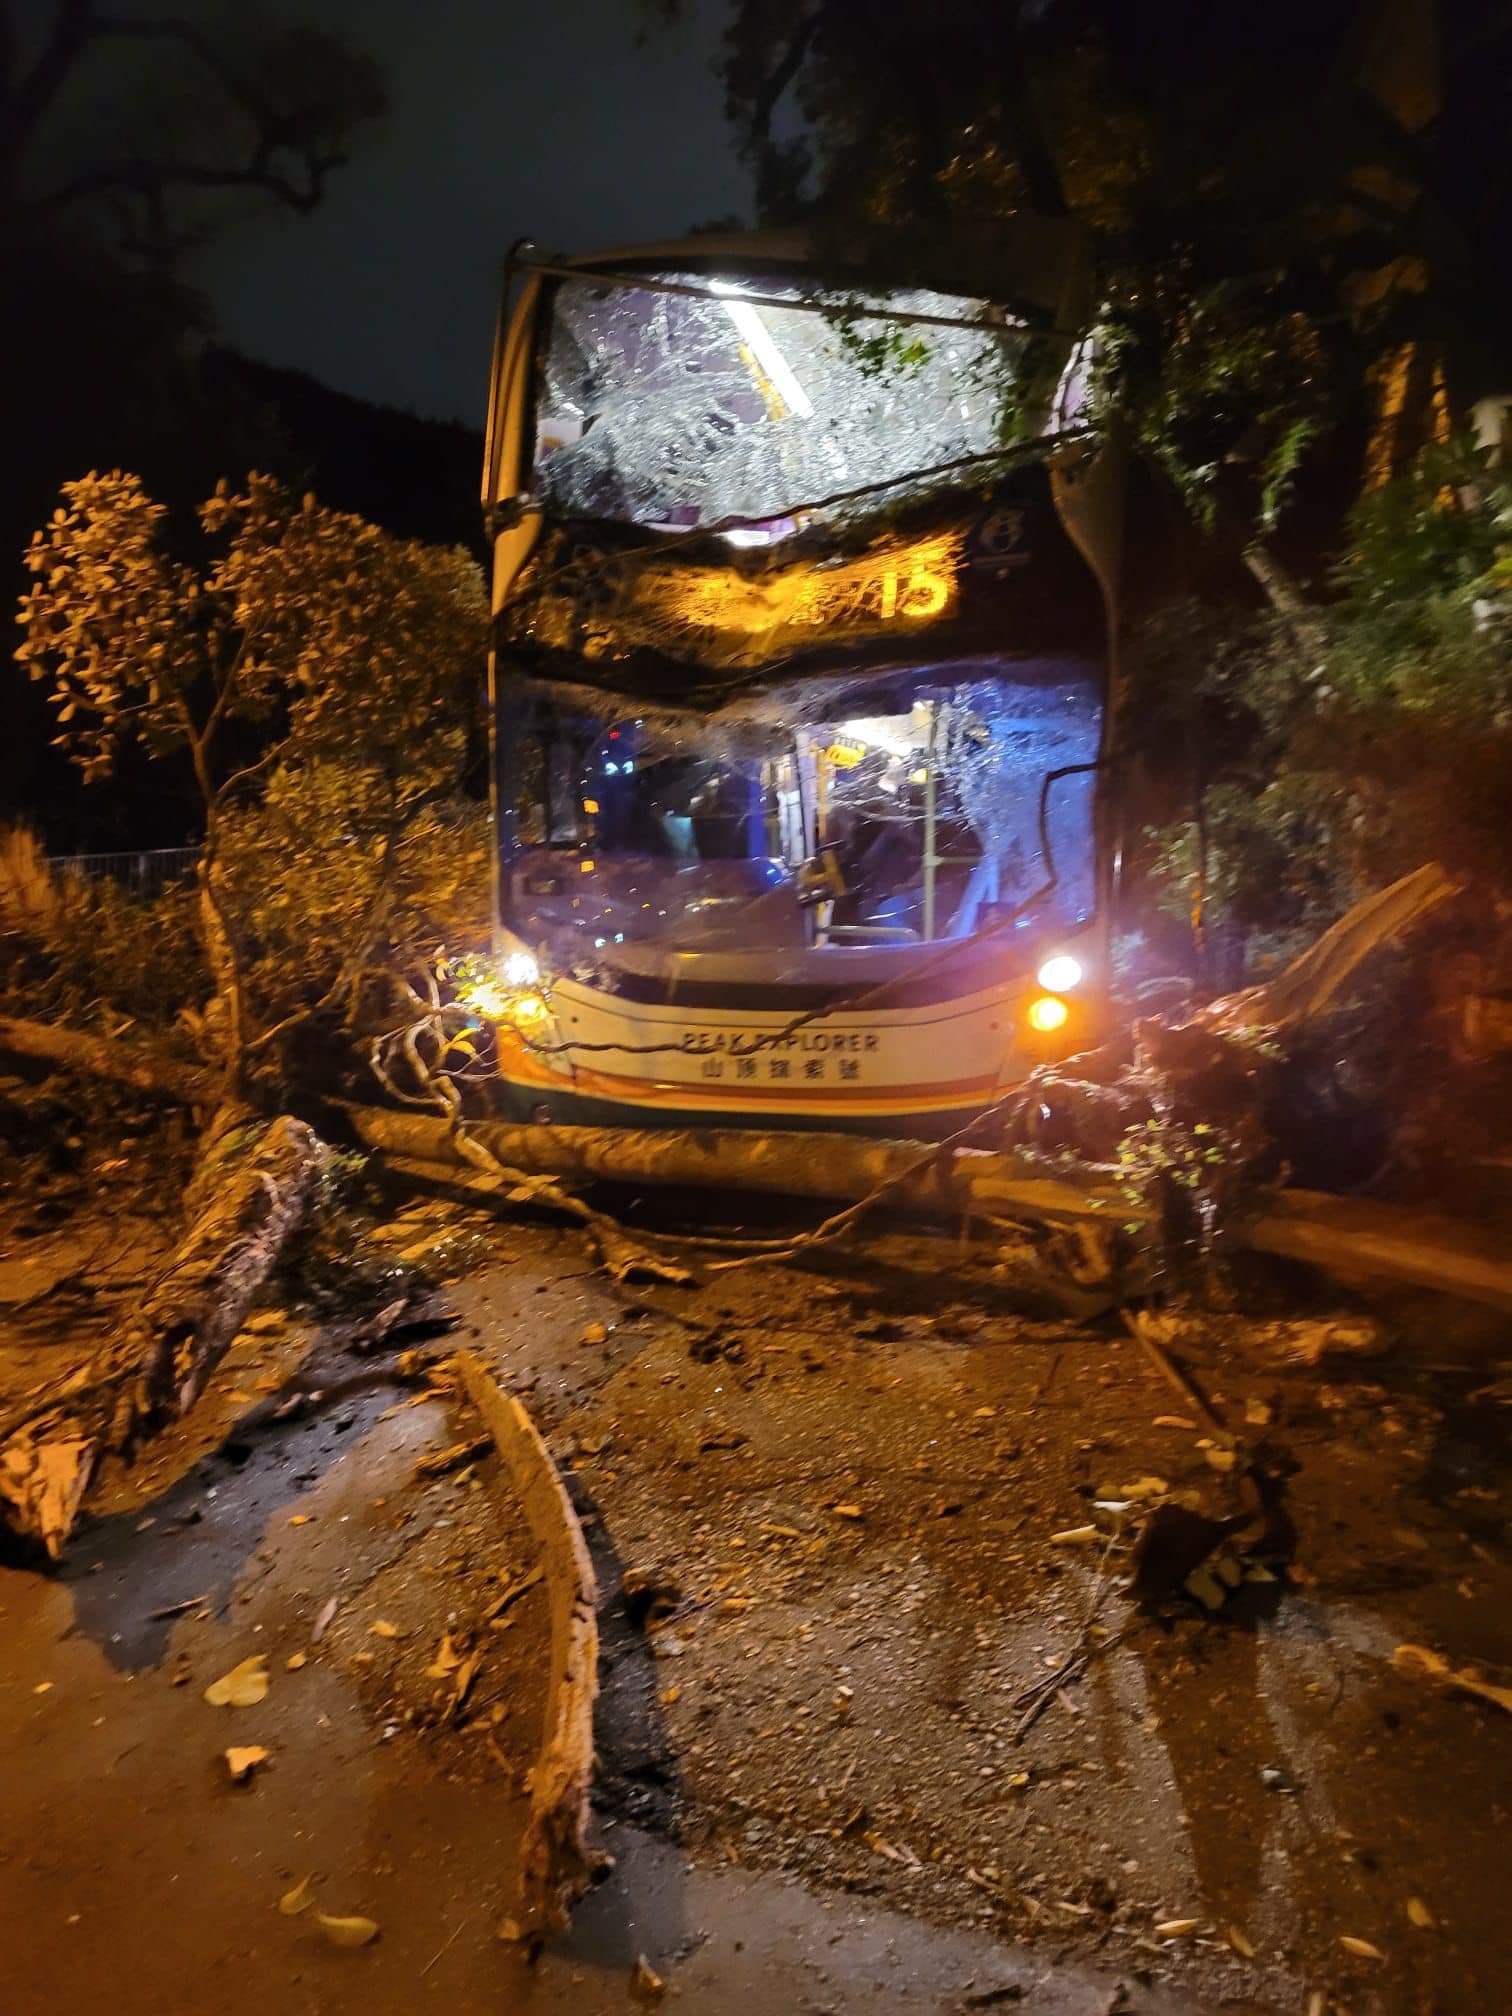 The bus was hit by a falling tree on The Peak as the city felt the effects of Typhoon Nesat. Photo: Facebook